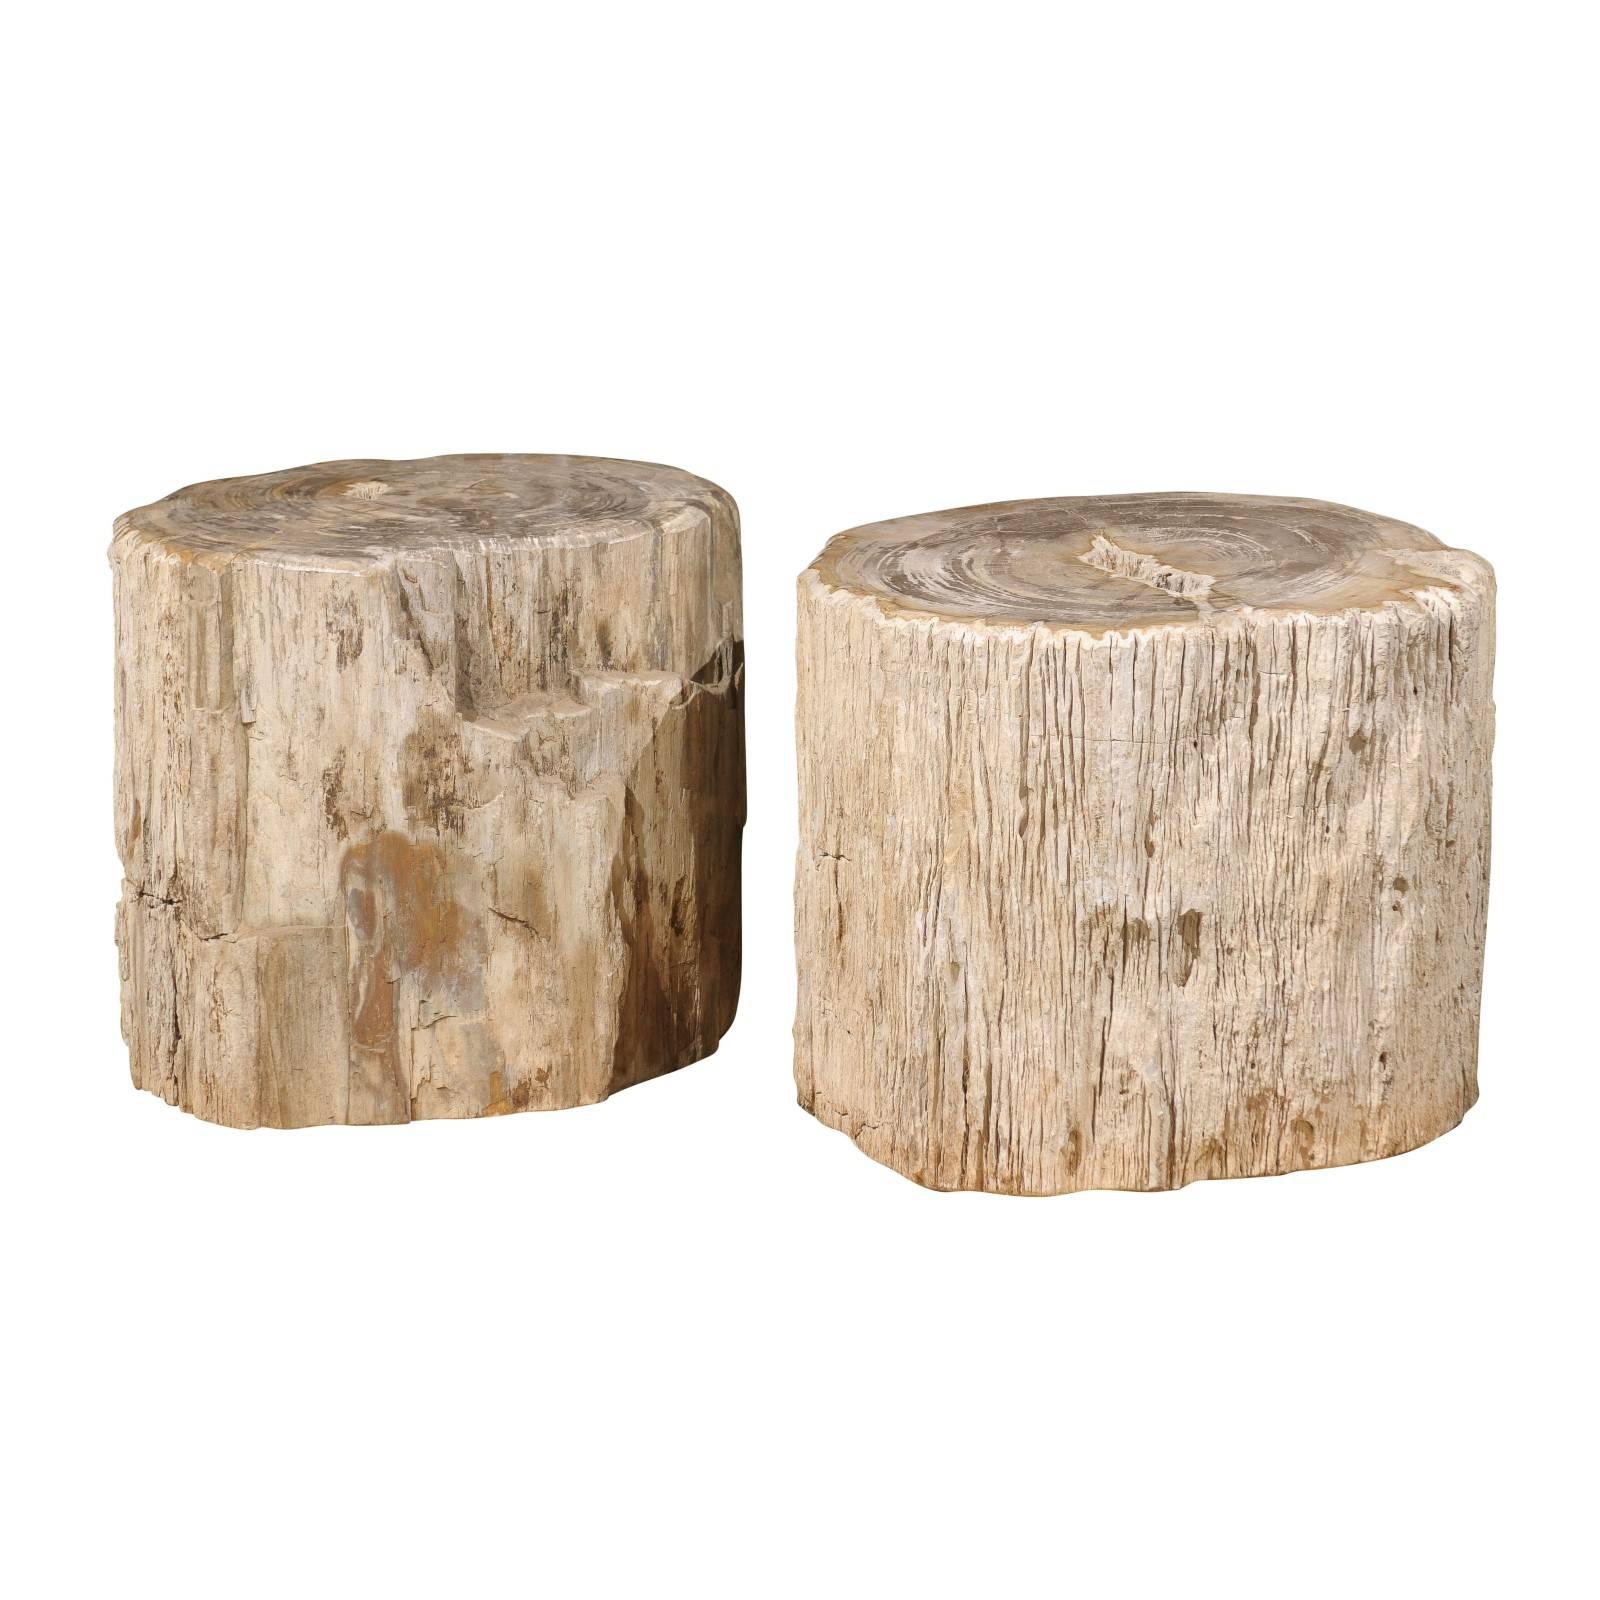 Pair of Short and Wide Petrified Wood Side or Drink Tables in Beige & Light Grey